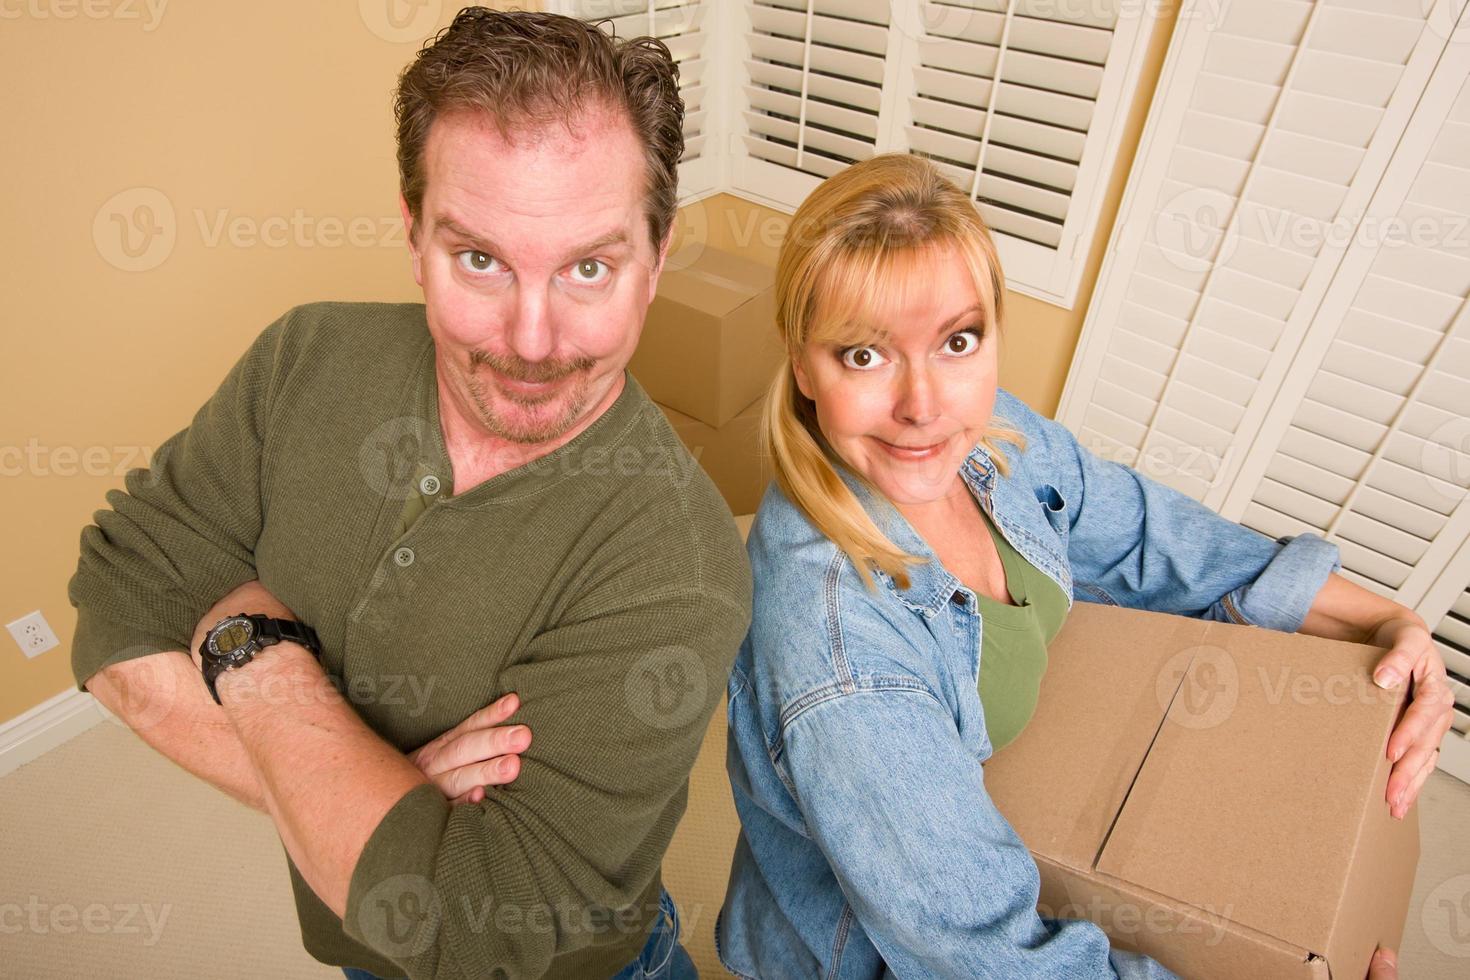 Goofy Couple and Moving Boxes in Empty Room photo